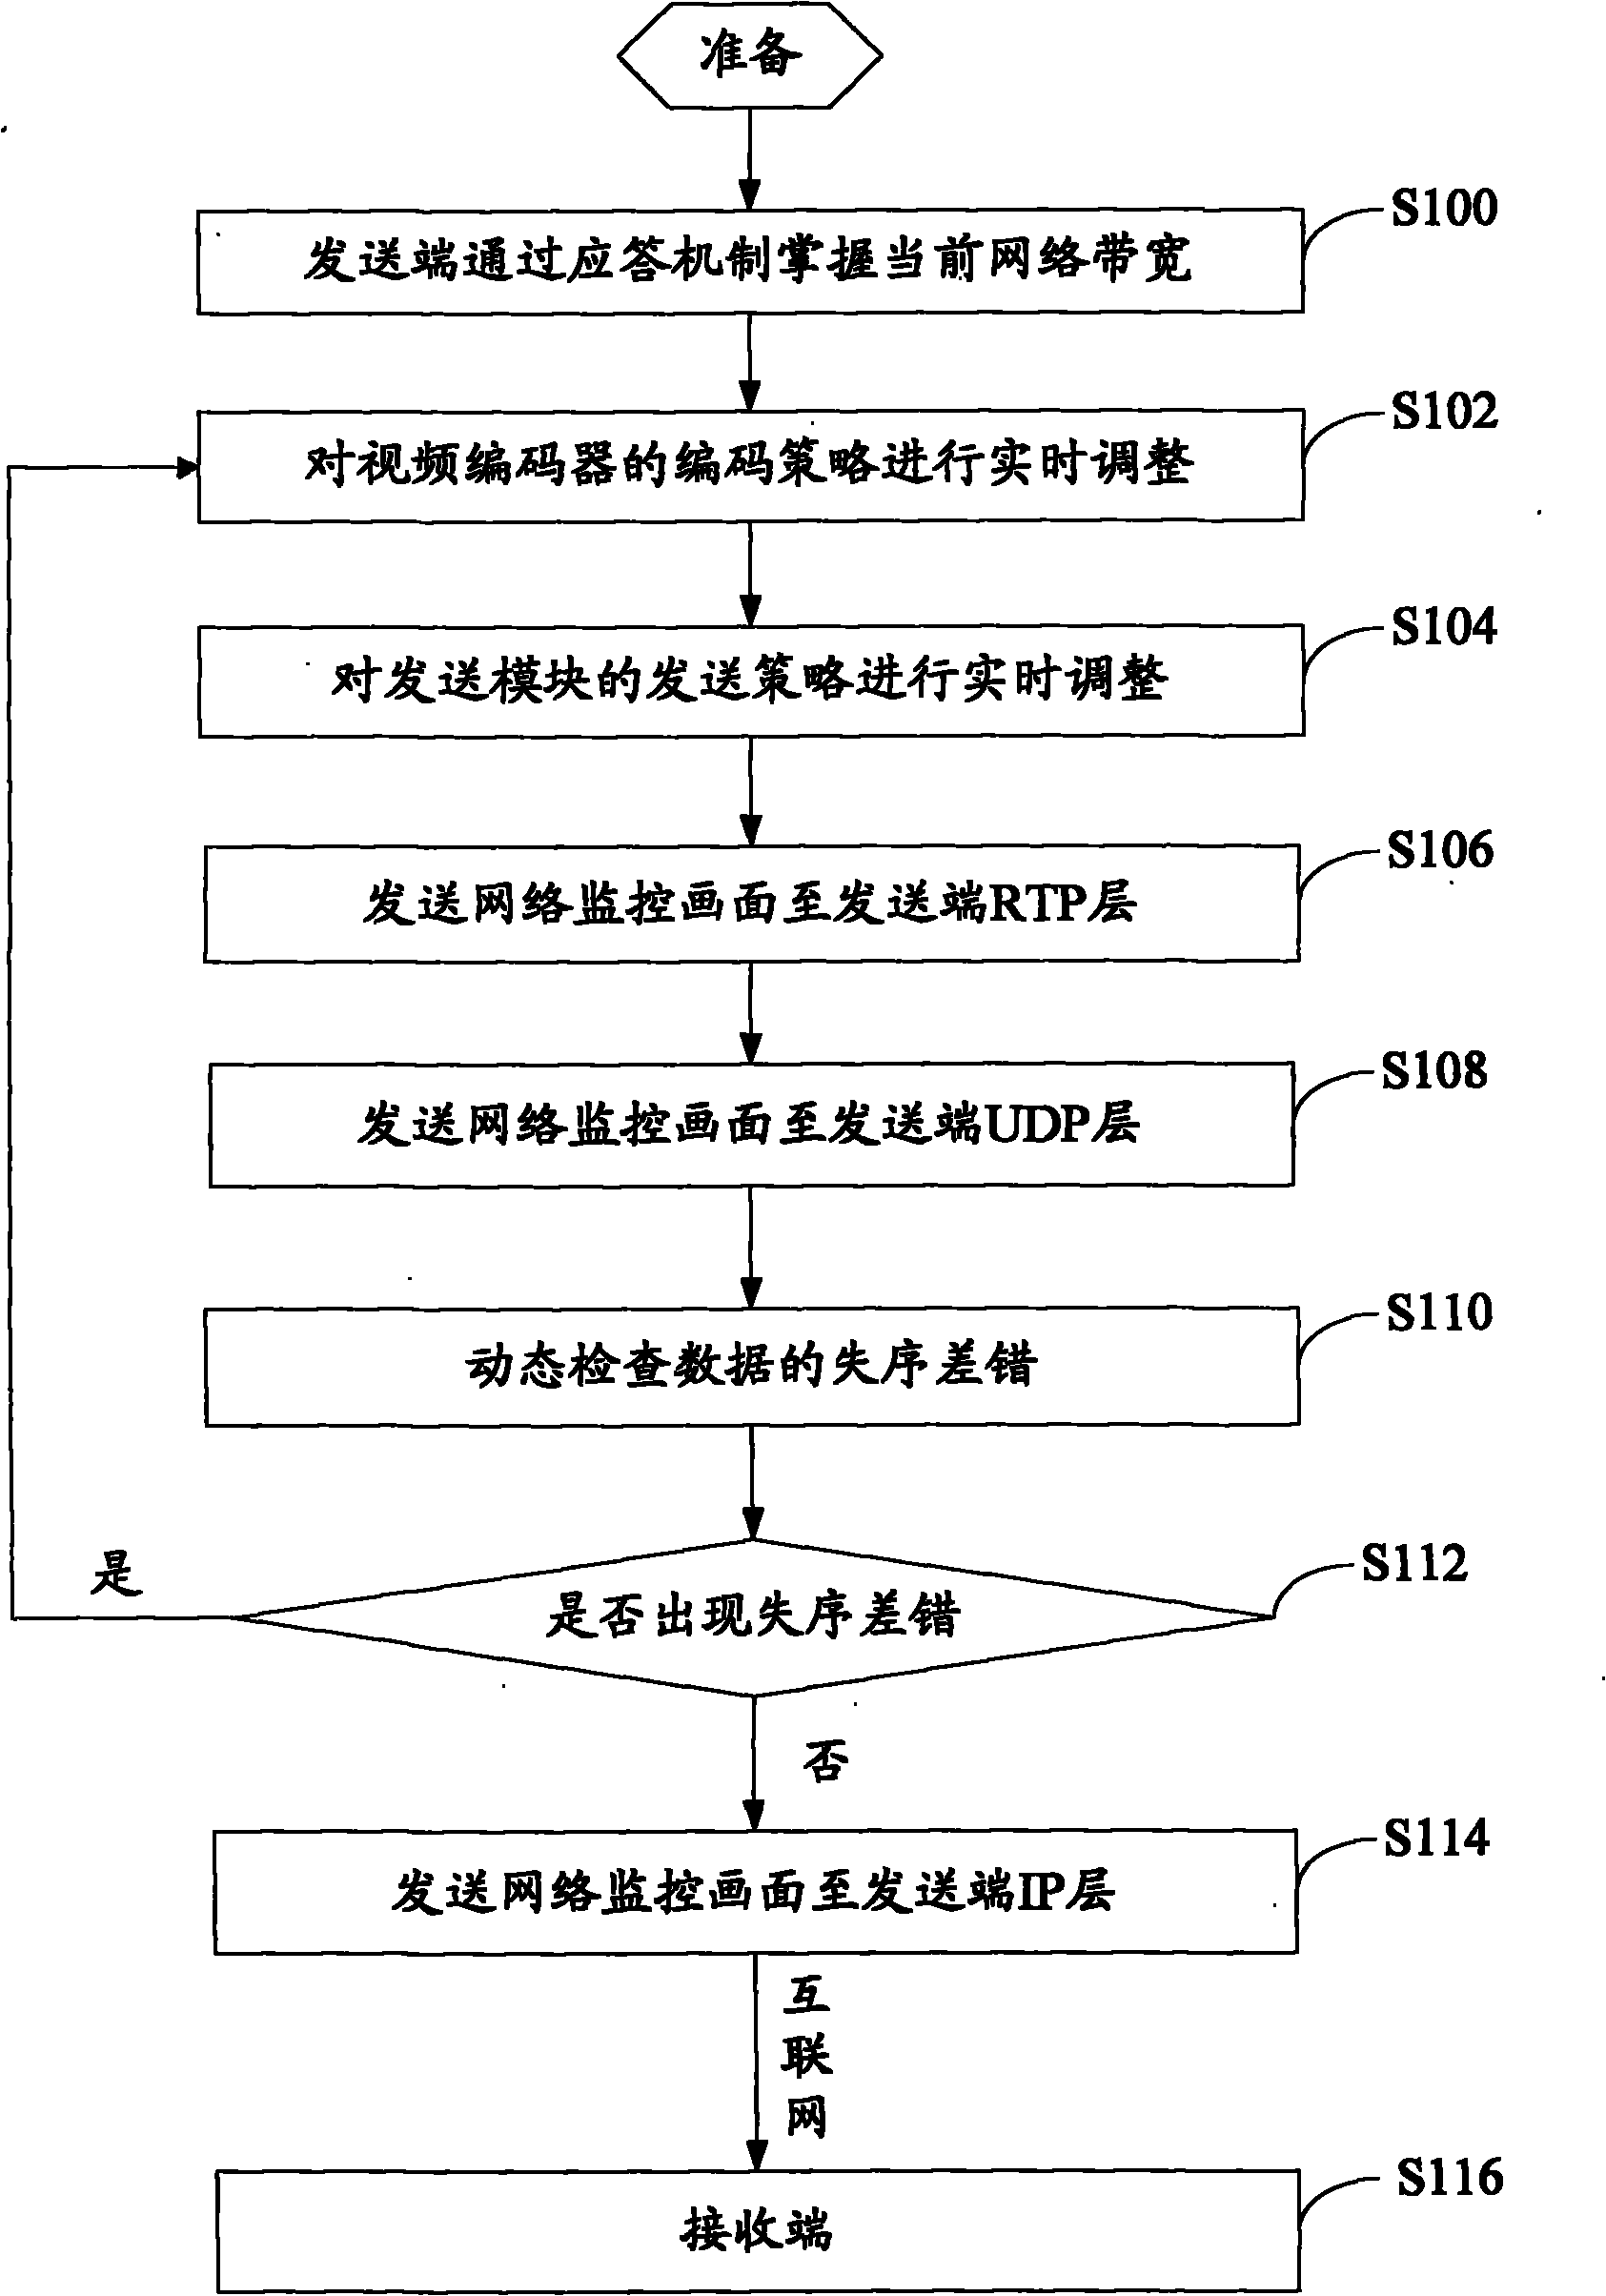 3G network video monitoring system and monitoring method